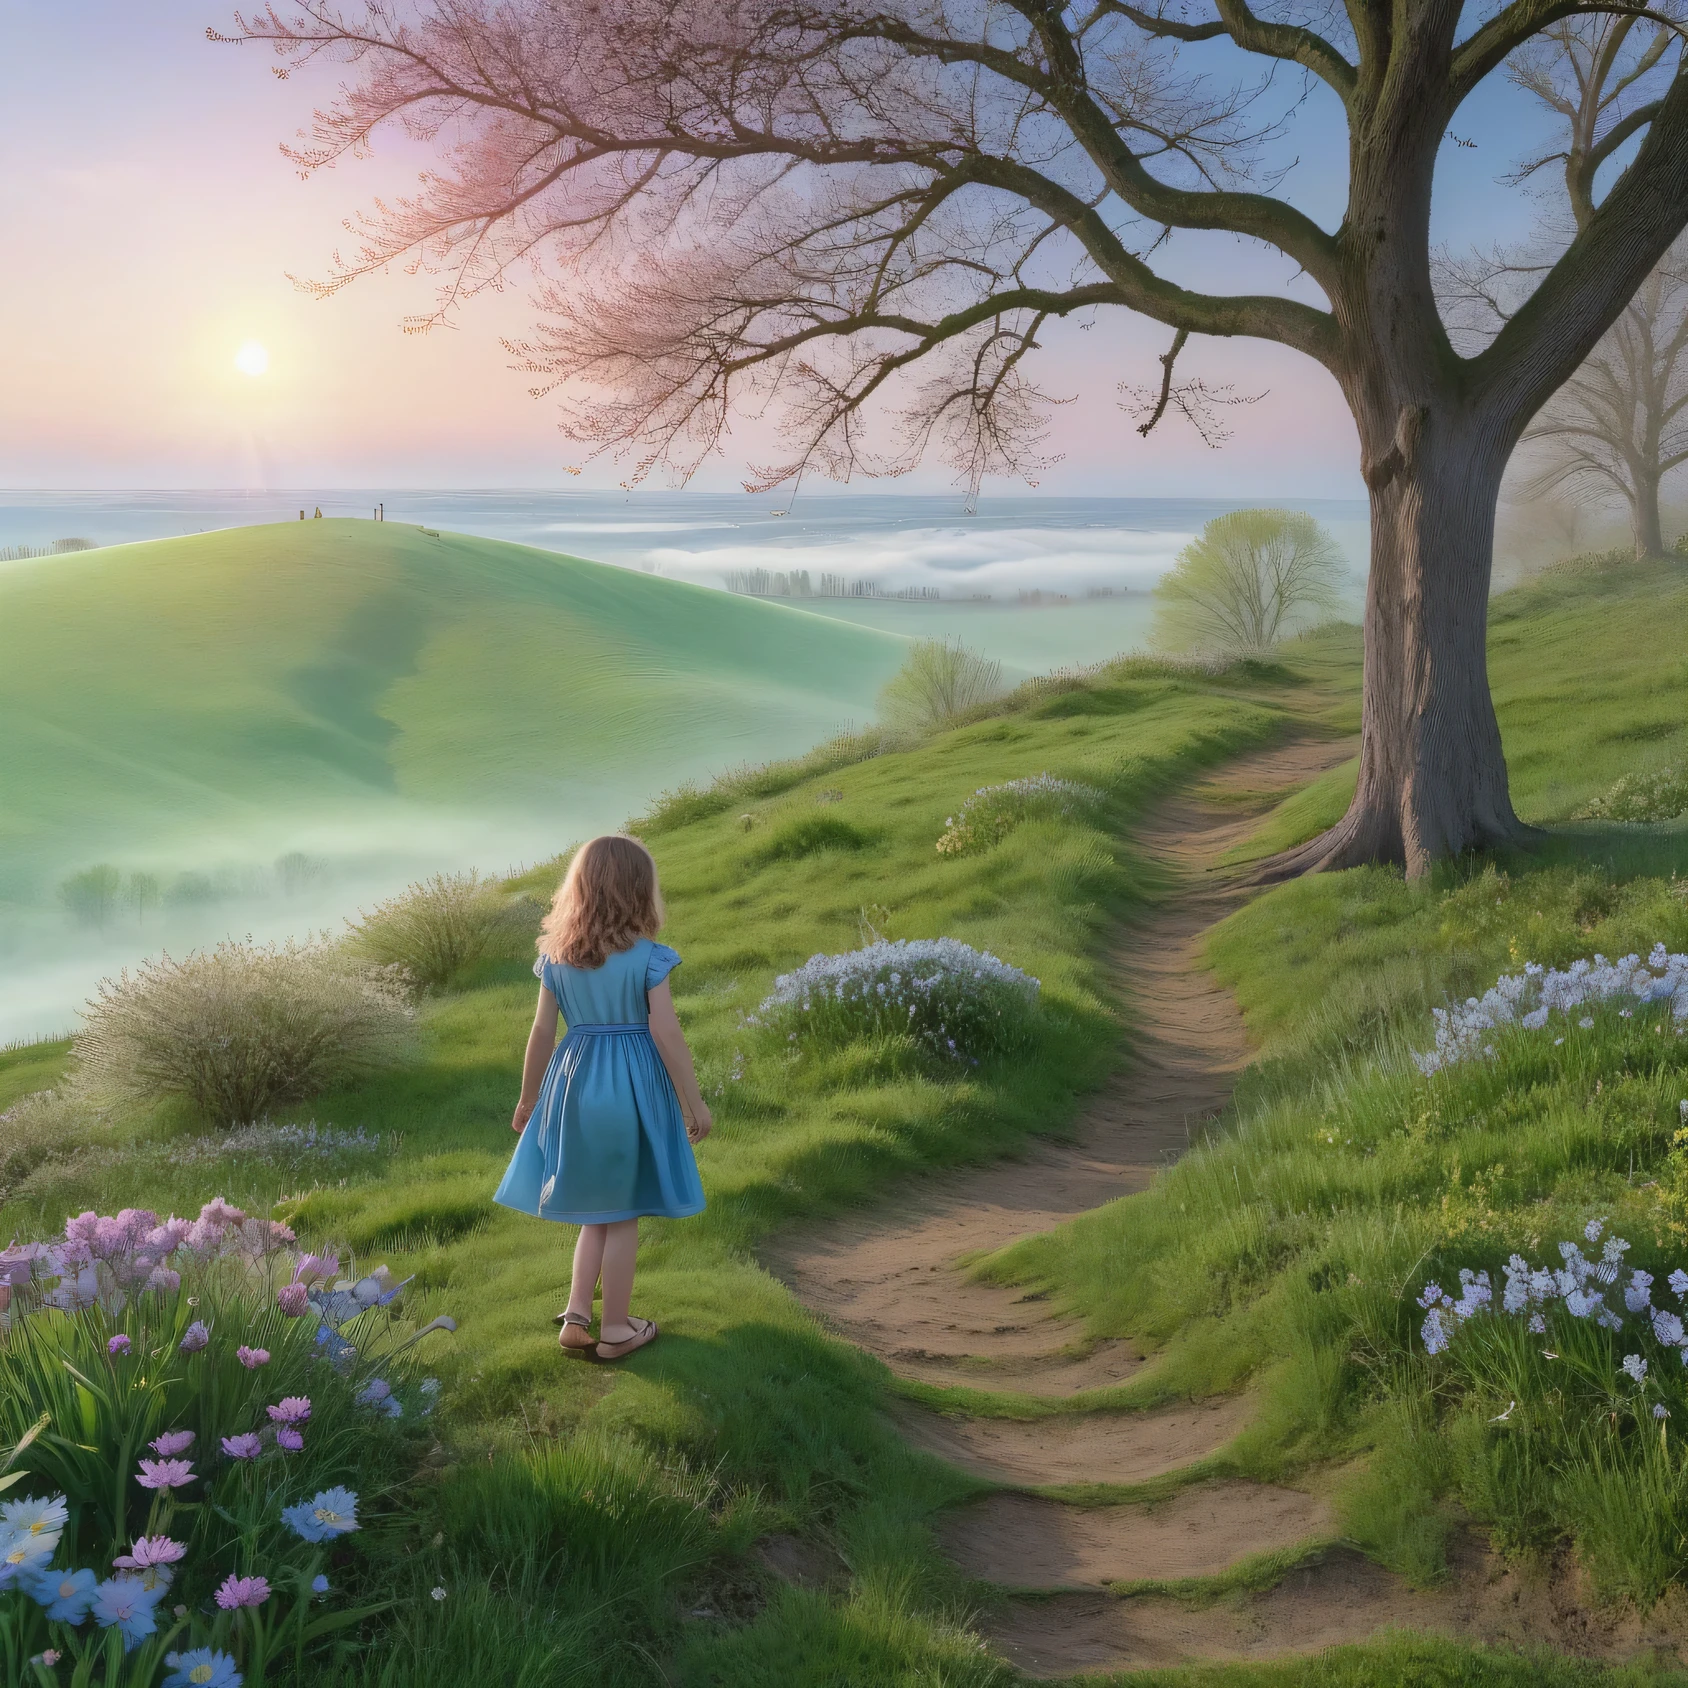 (light morning fog in the distance):1.2335, (POV:1.4), First-person view from a high cliff, an 8-year-old girl with light curly hair in a blue dress and blue sandals looks down, a spring meadow stretches in front of him with the first spring flowers and young green grass, the first spring insects circle over the flowers, trees and shrubs grow on the edge of the clearing, spring flowers on the trees, green buds swell on the shrubs, early vesta, morning, the sun is just beginning to rise on the distant horizon, coloring the sky pinkish, Spring Morning, Beautiful Spring Morning, palette of early spring morning, (masterpiece:1.305), (high resolution:1.305), 32k, (digital art:1.1), texture smoothing